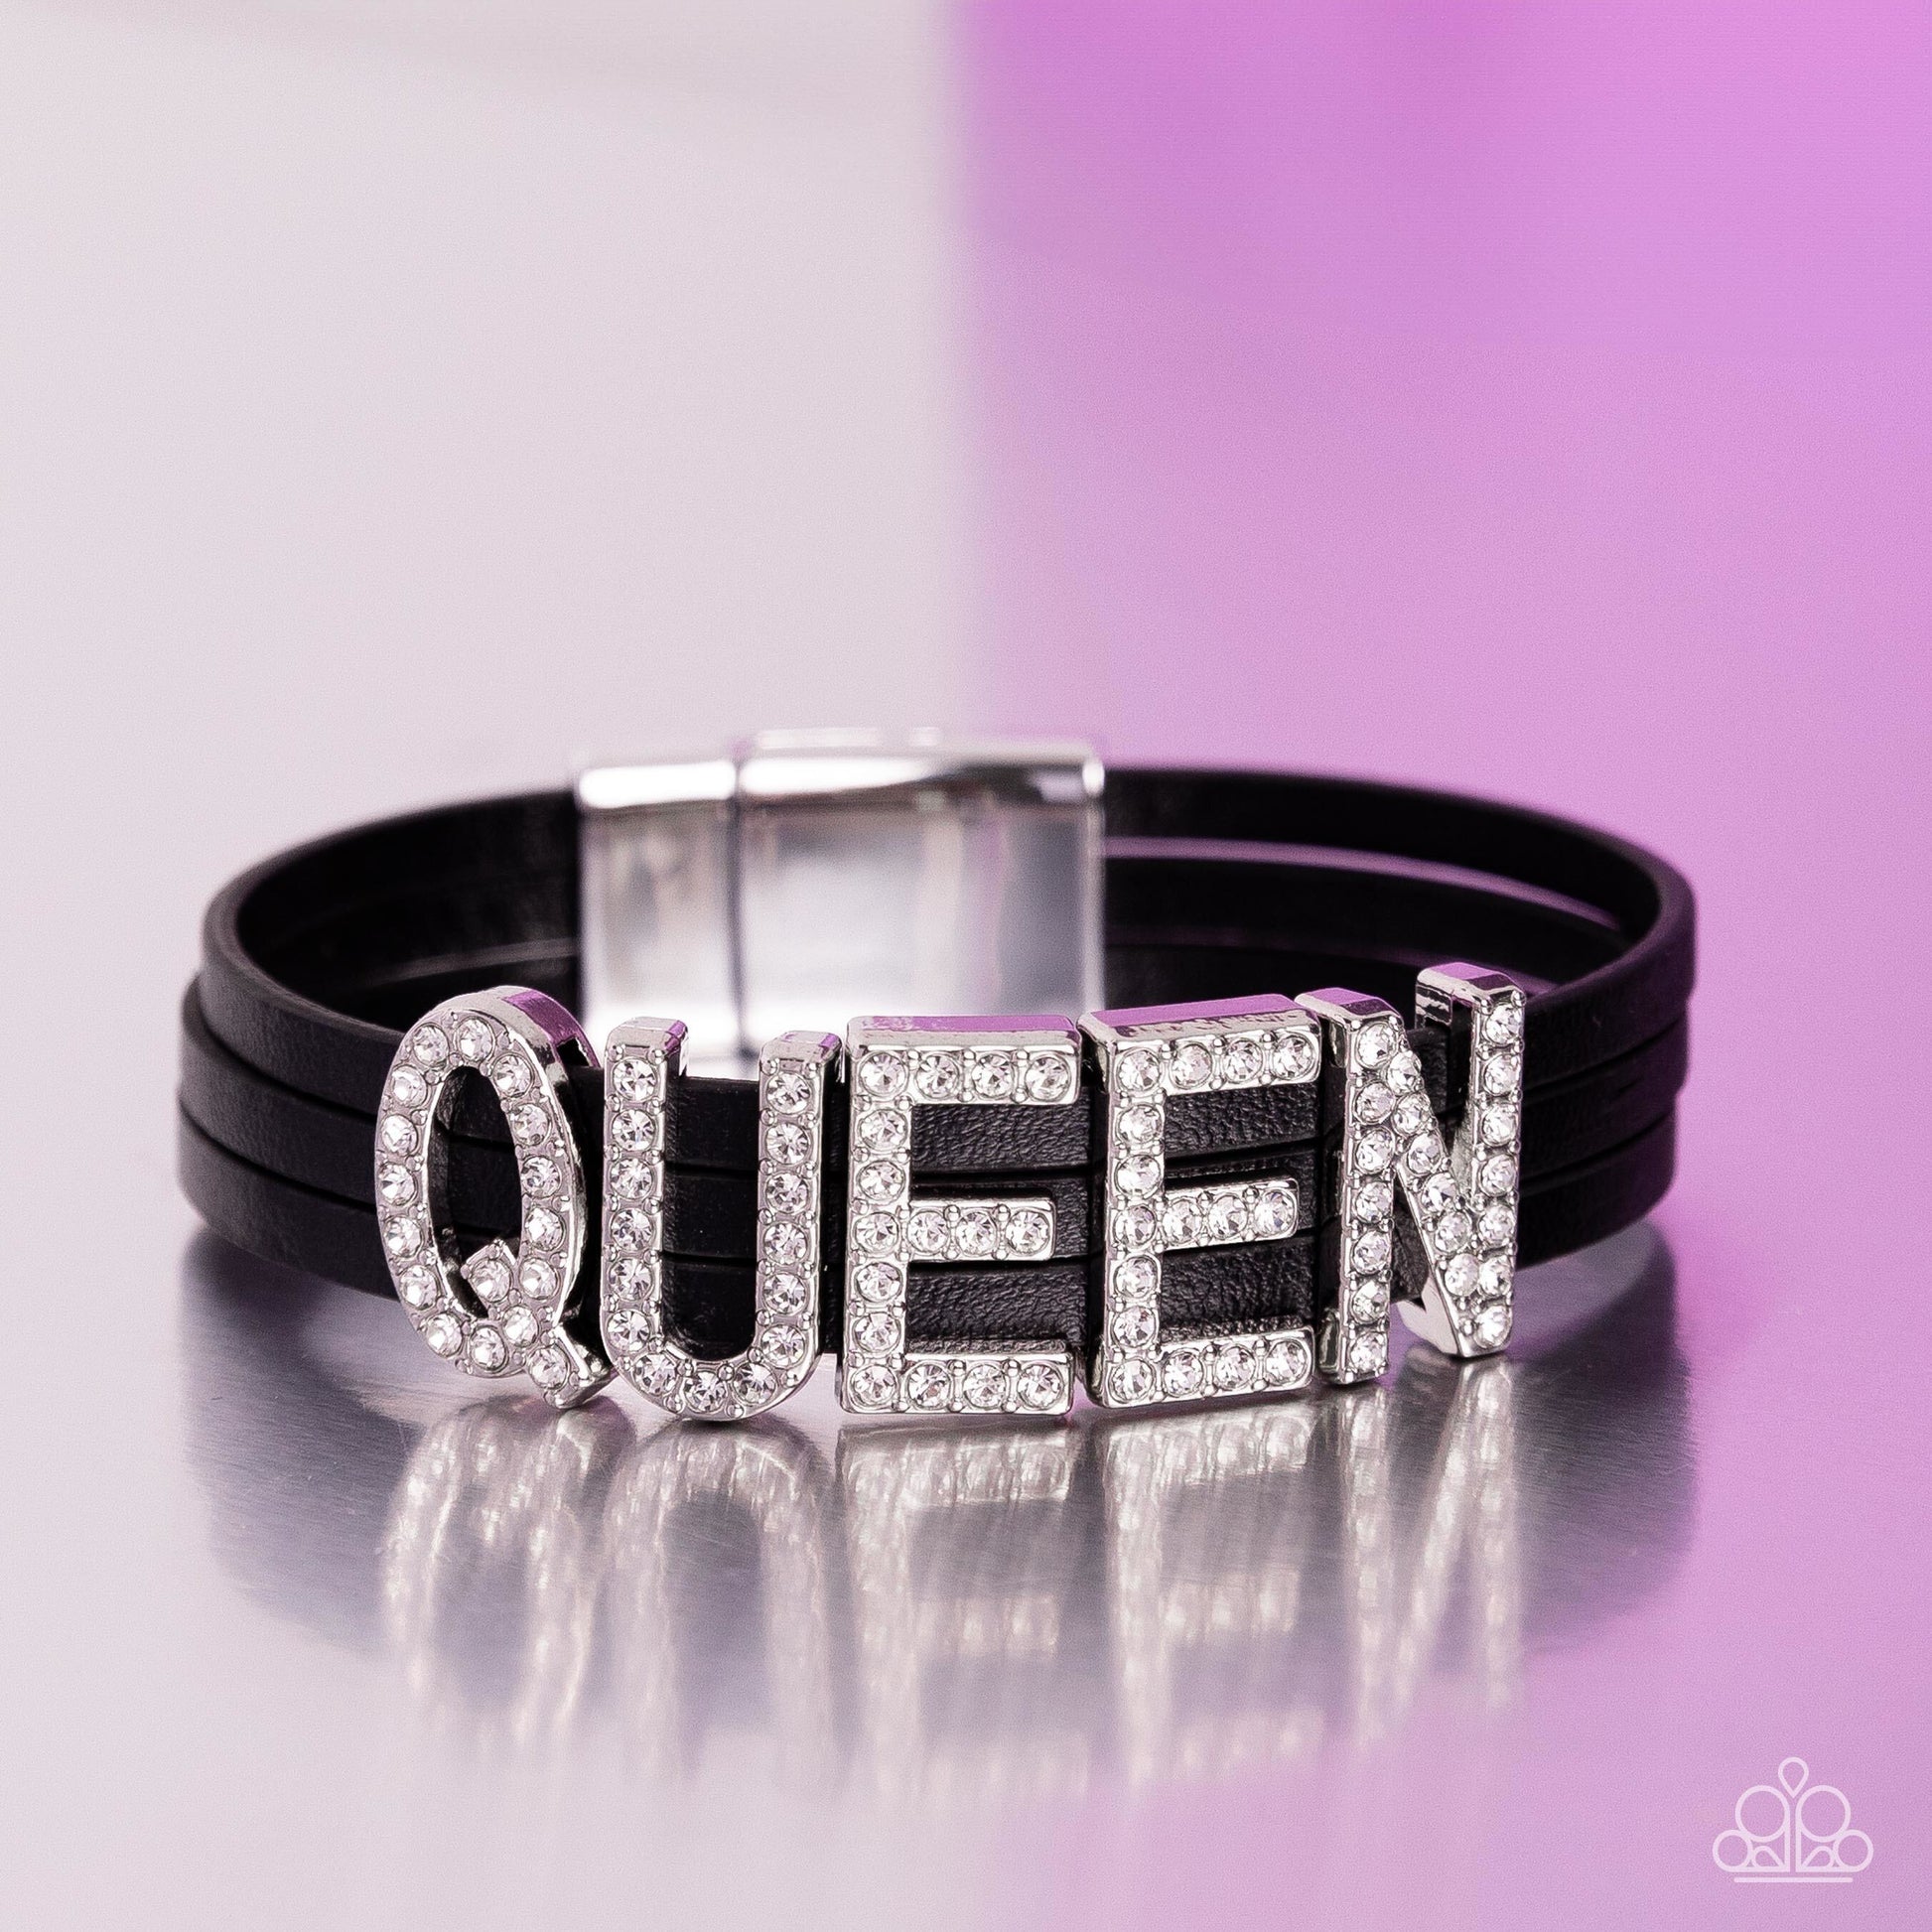 Queen of My Life Black Wrap Bracelet - Paparazzi Accessories  Featuring glistening white rhinestones, silver letter frames forming the word "QUEEN" are threaded along layers of black leather strands around the wrist for a dazzling statement. Features a magnetic closure.  Sold as one individual bracelet.  P9SE-BKXX-343XX